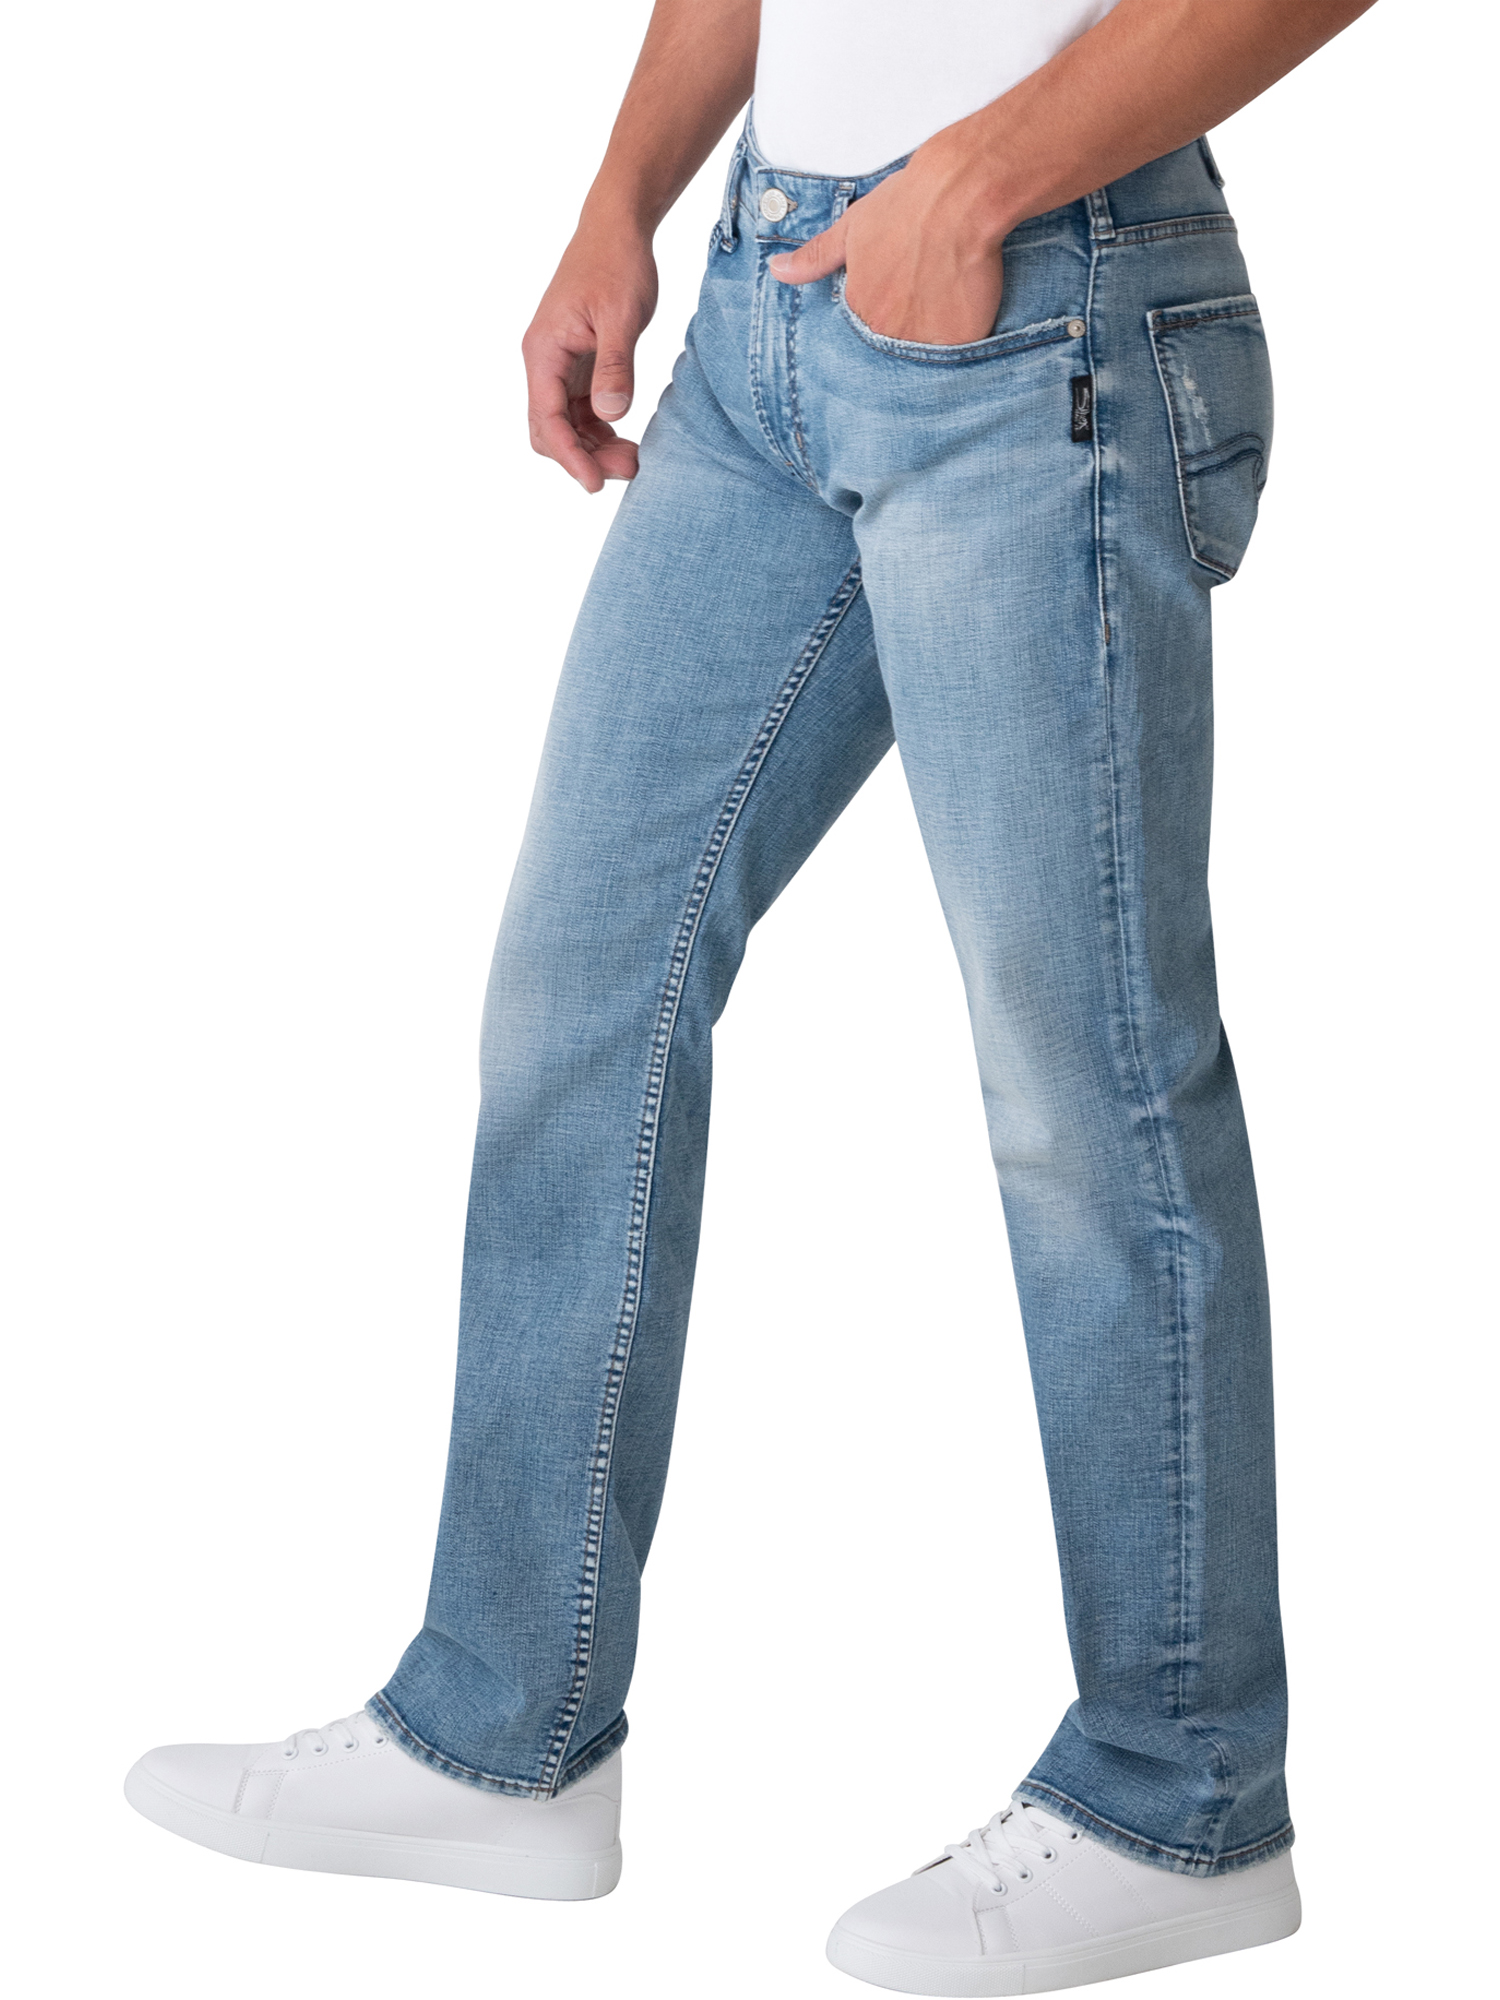 Silver Jeans Co. Men's Allan Classic Fit Straight Leg Jeans, Waist Sizes 28-44 - image 3 of 3